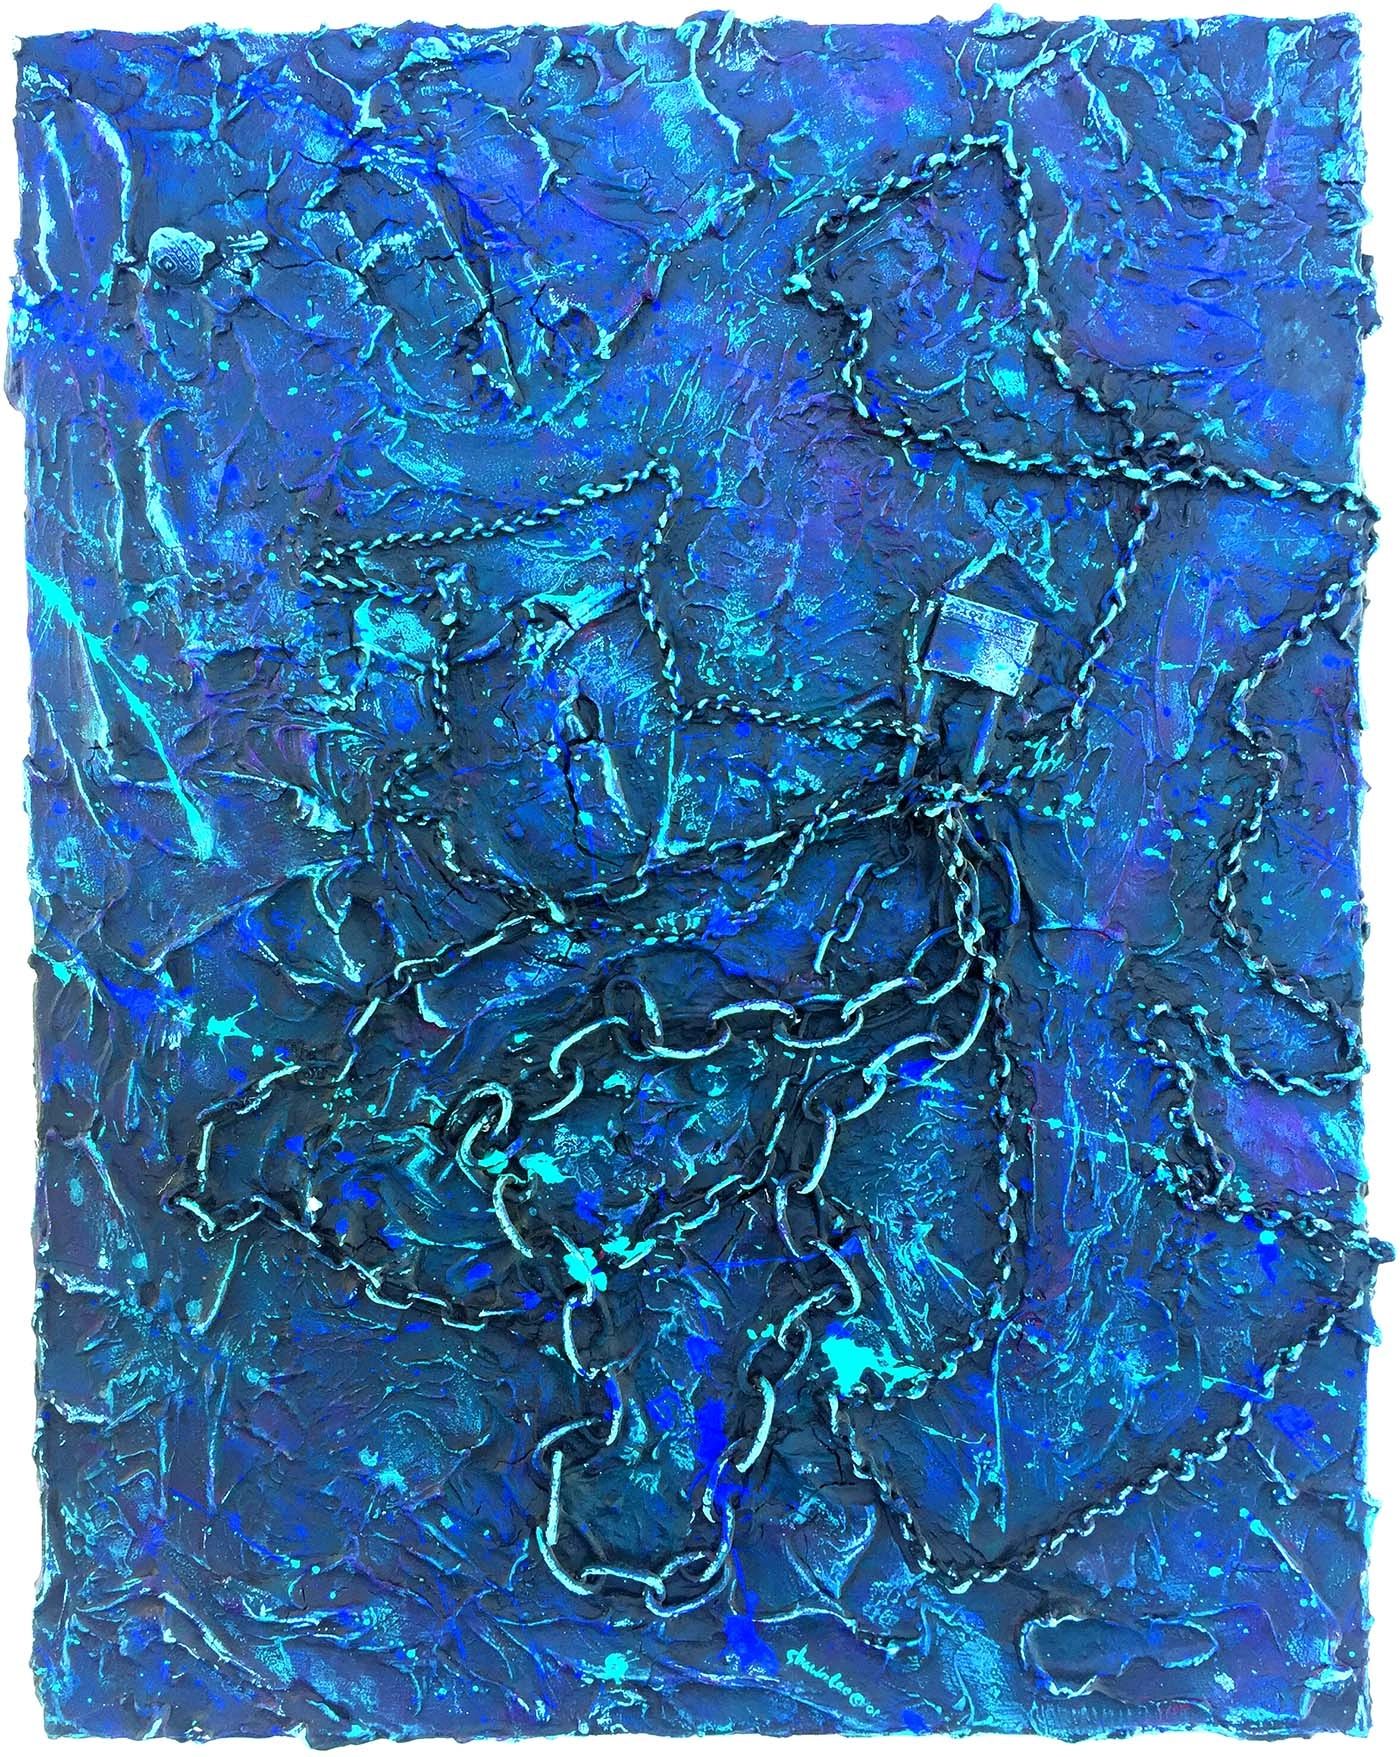 A rectangle bluish texture painting over steel chain links, a master lock, and a broken key.